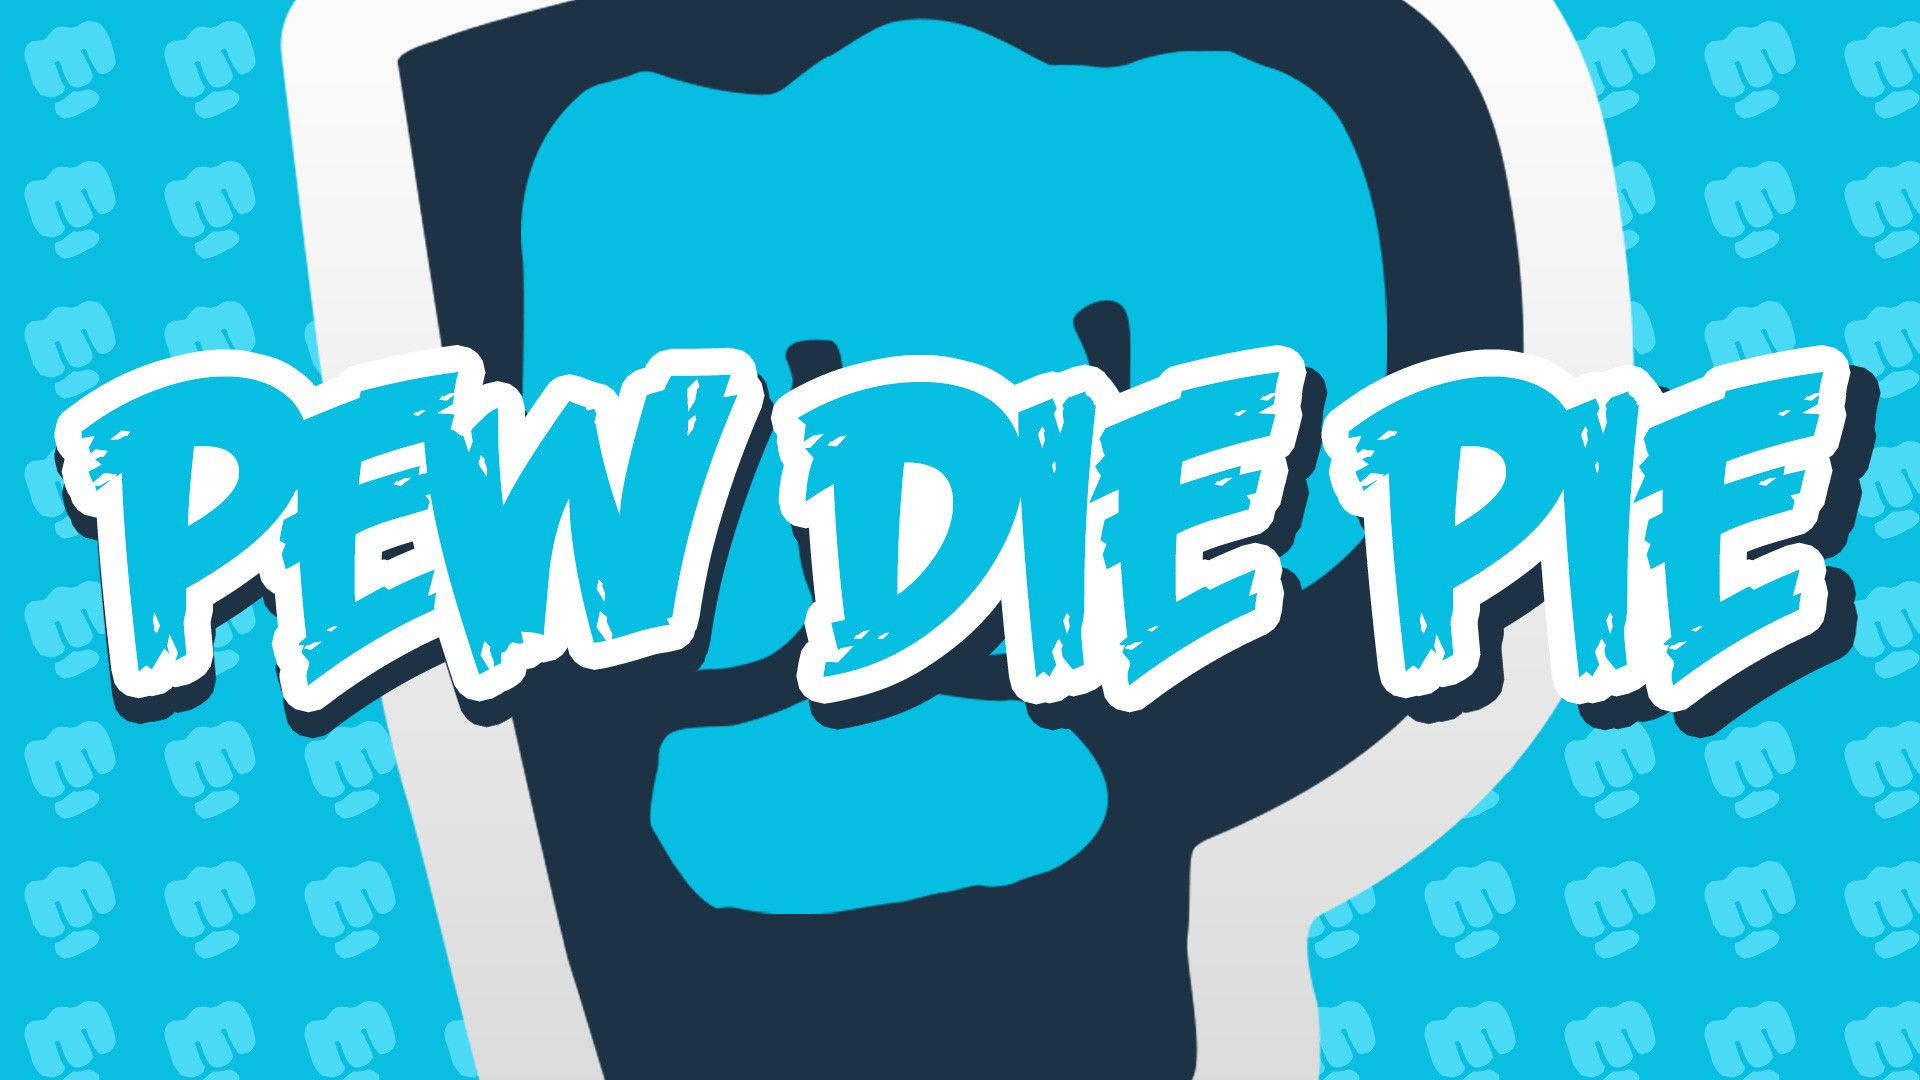 Show Us Your #brofist! Background